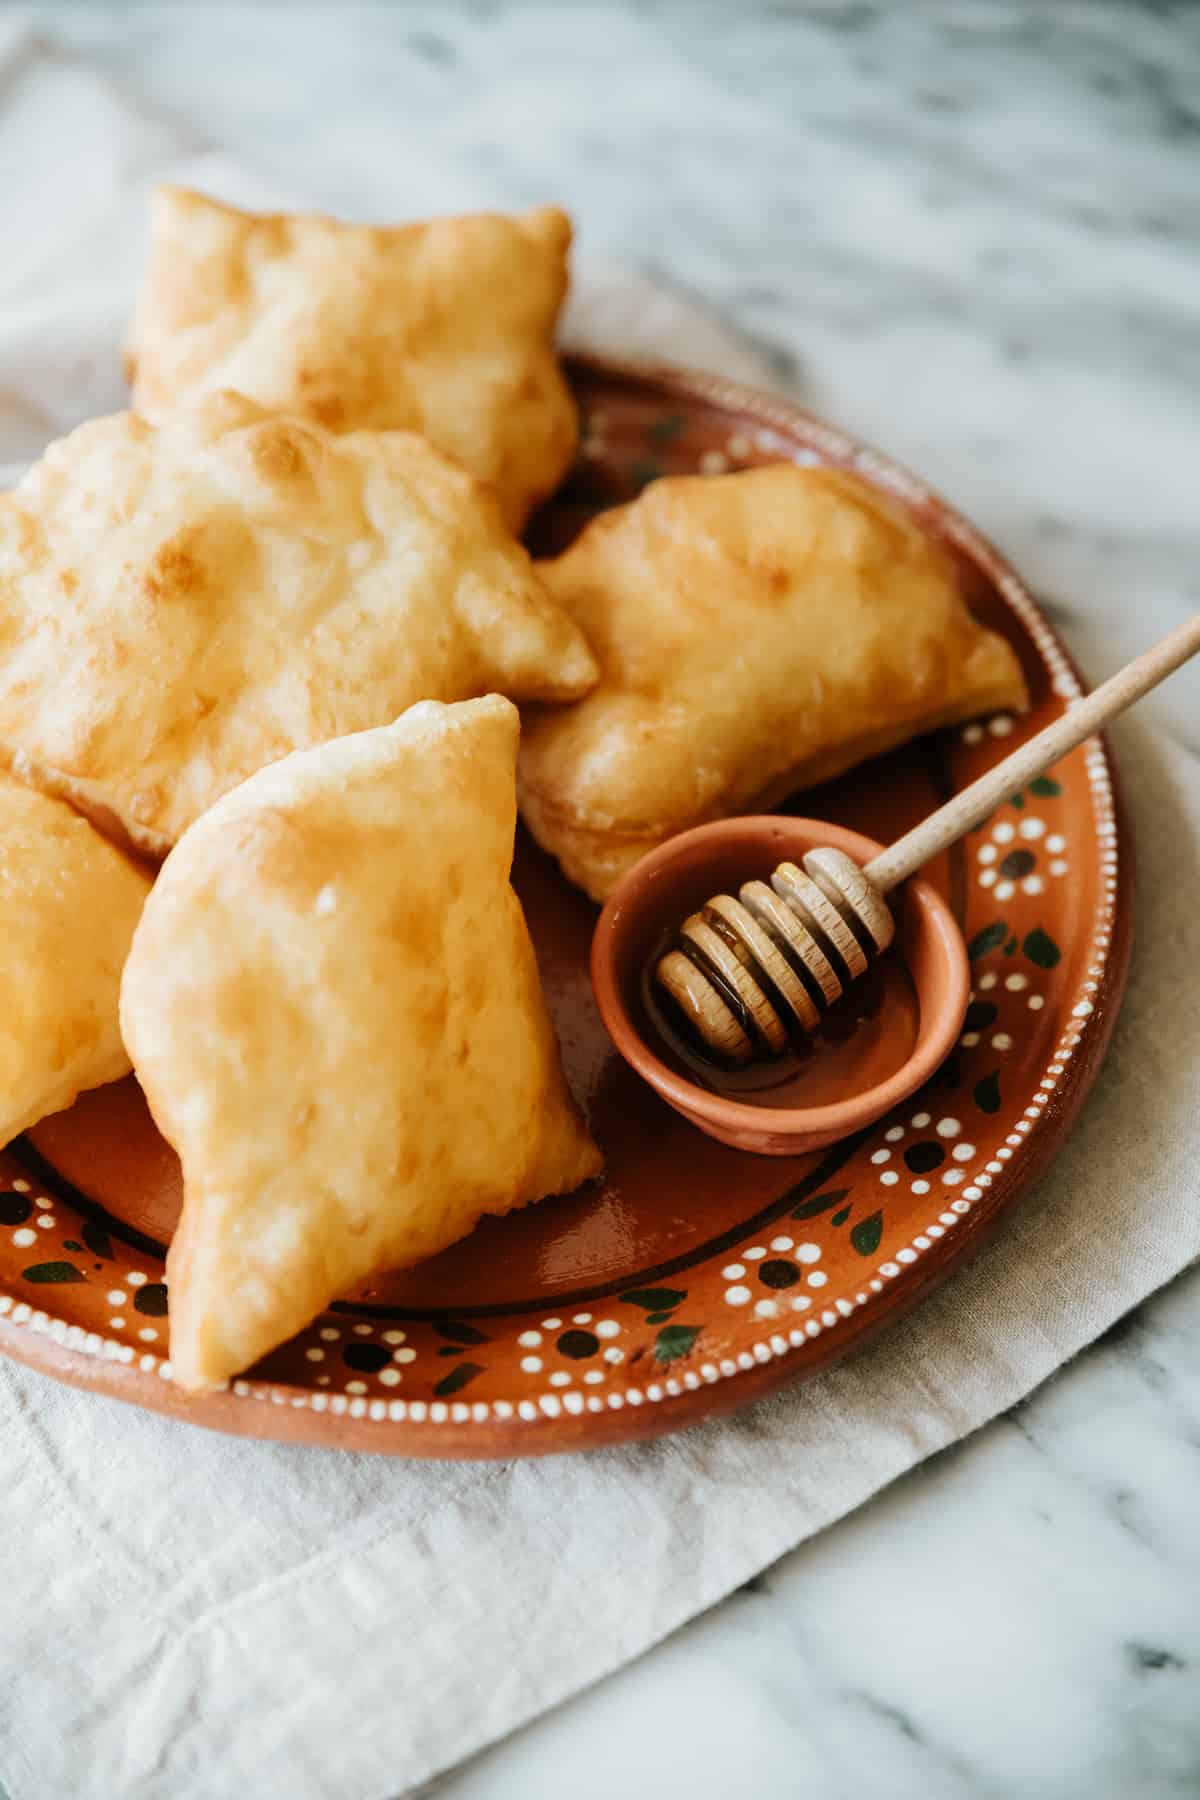 fried Sopaipillas on a brown Mexican plate with honey drizzler stick.